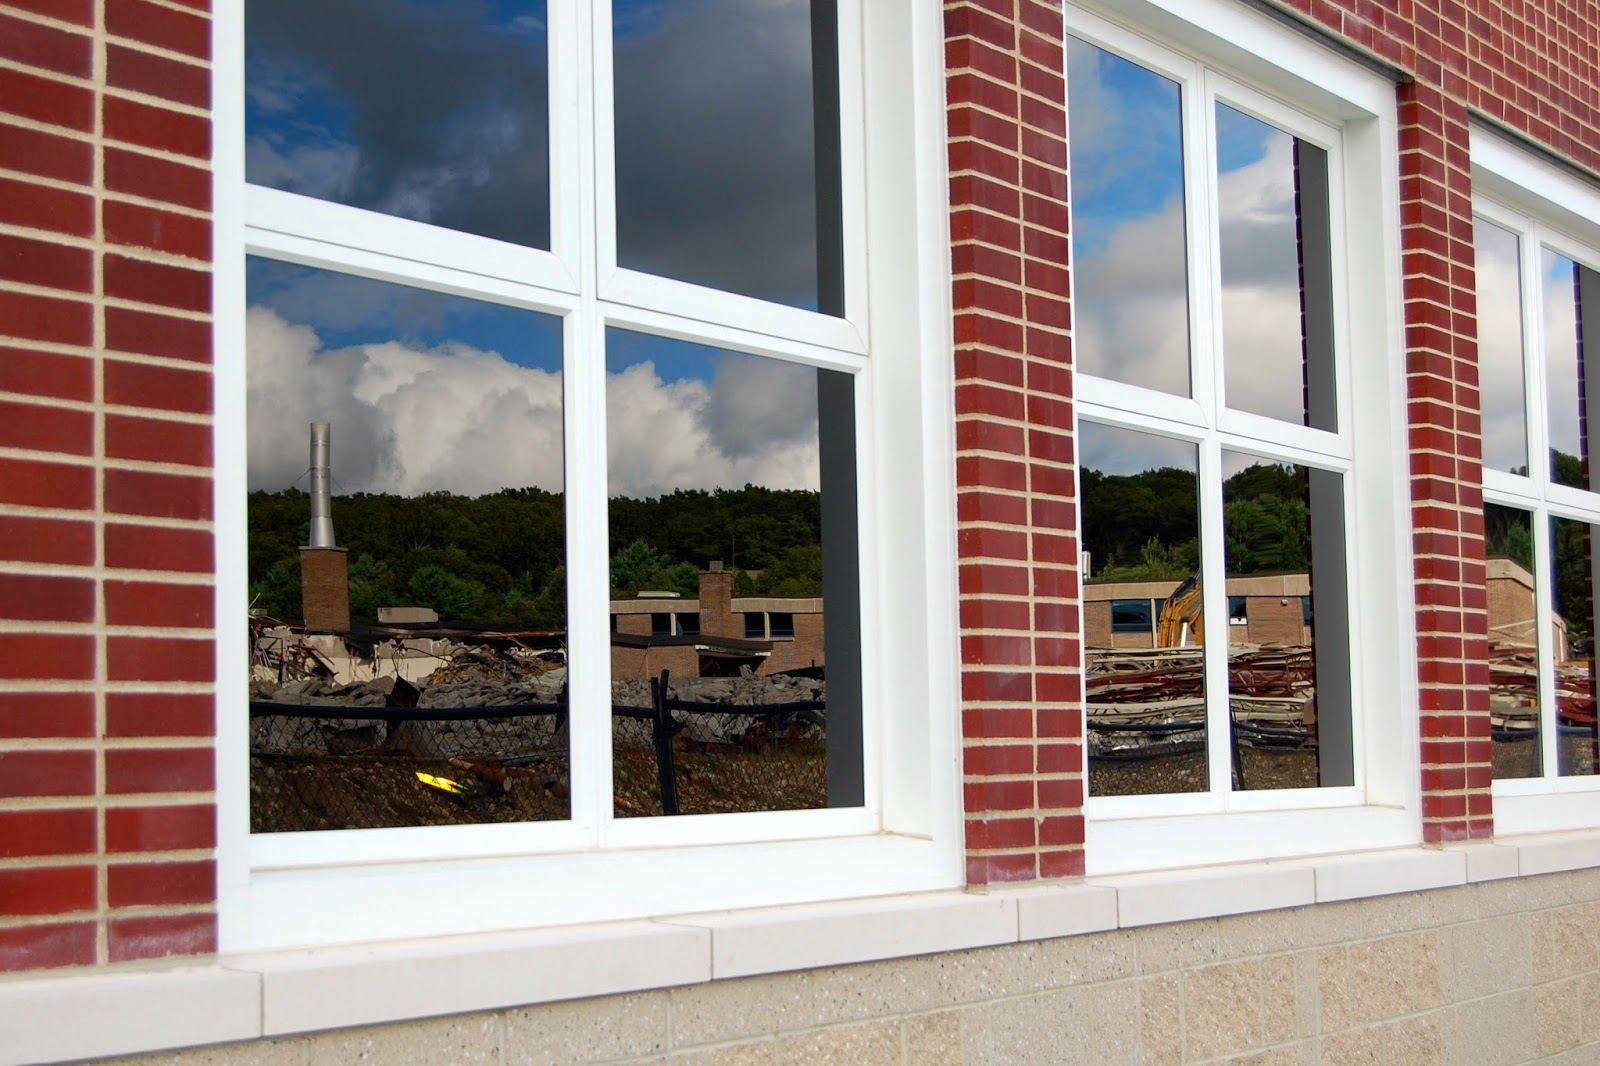 the old building reflected in the windows of the new Franklin High School